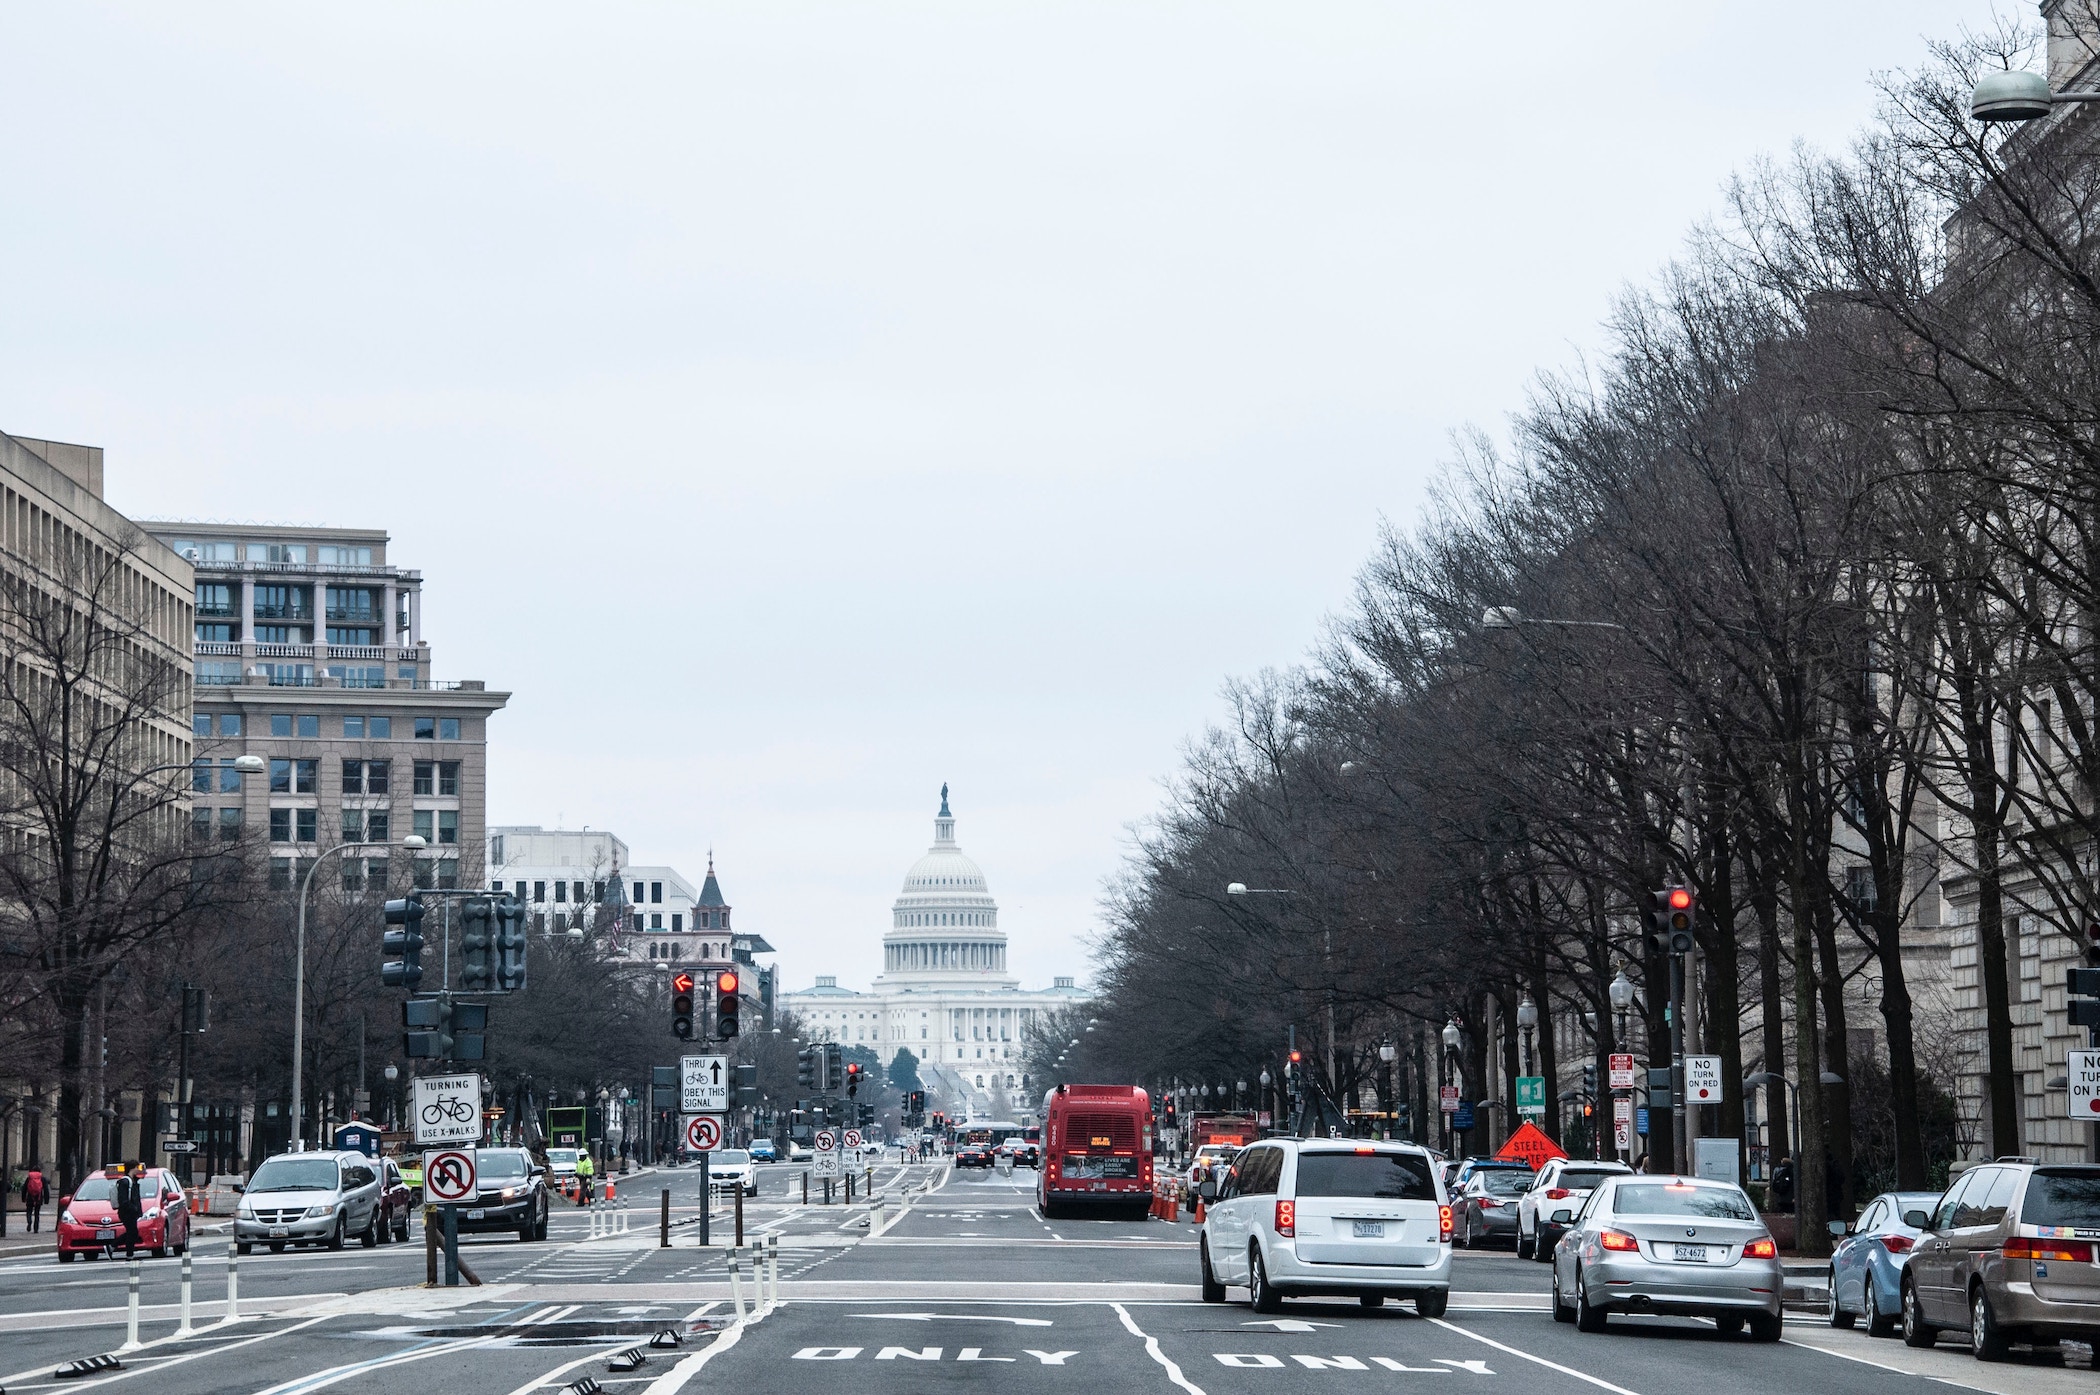 The dearth of housing supply in Washington, D.C. continues to challenge the local housing markets, as sales dropped in February 2019 for the seventh month in a row.